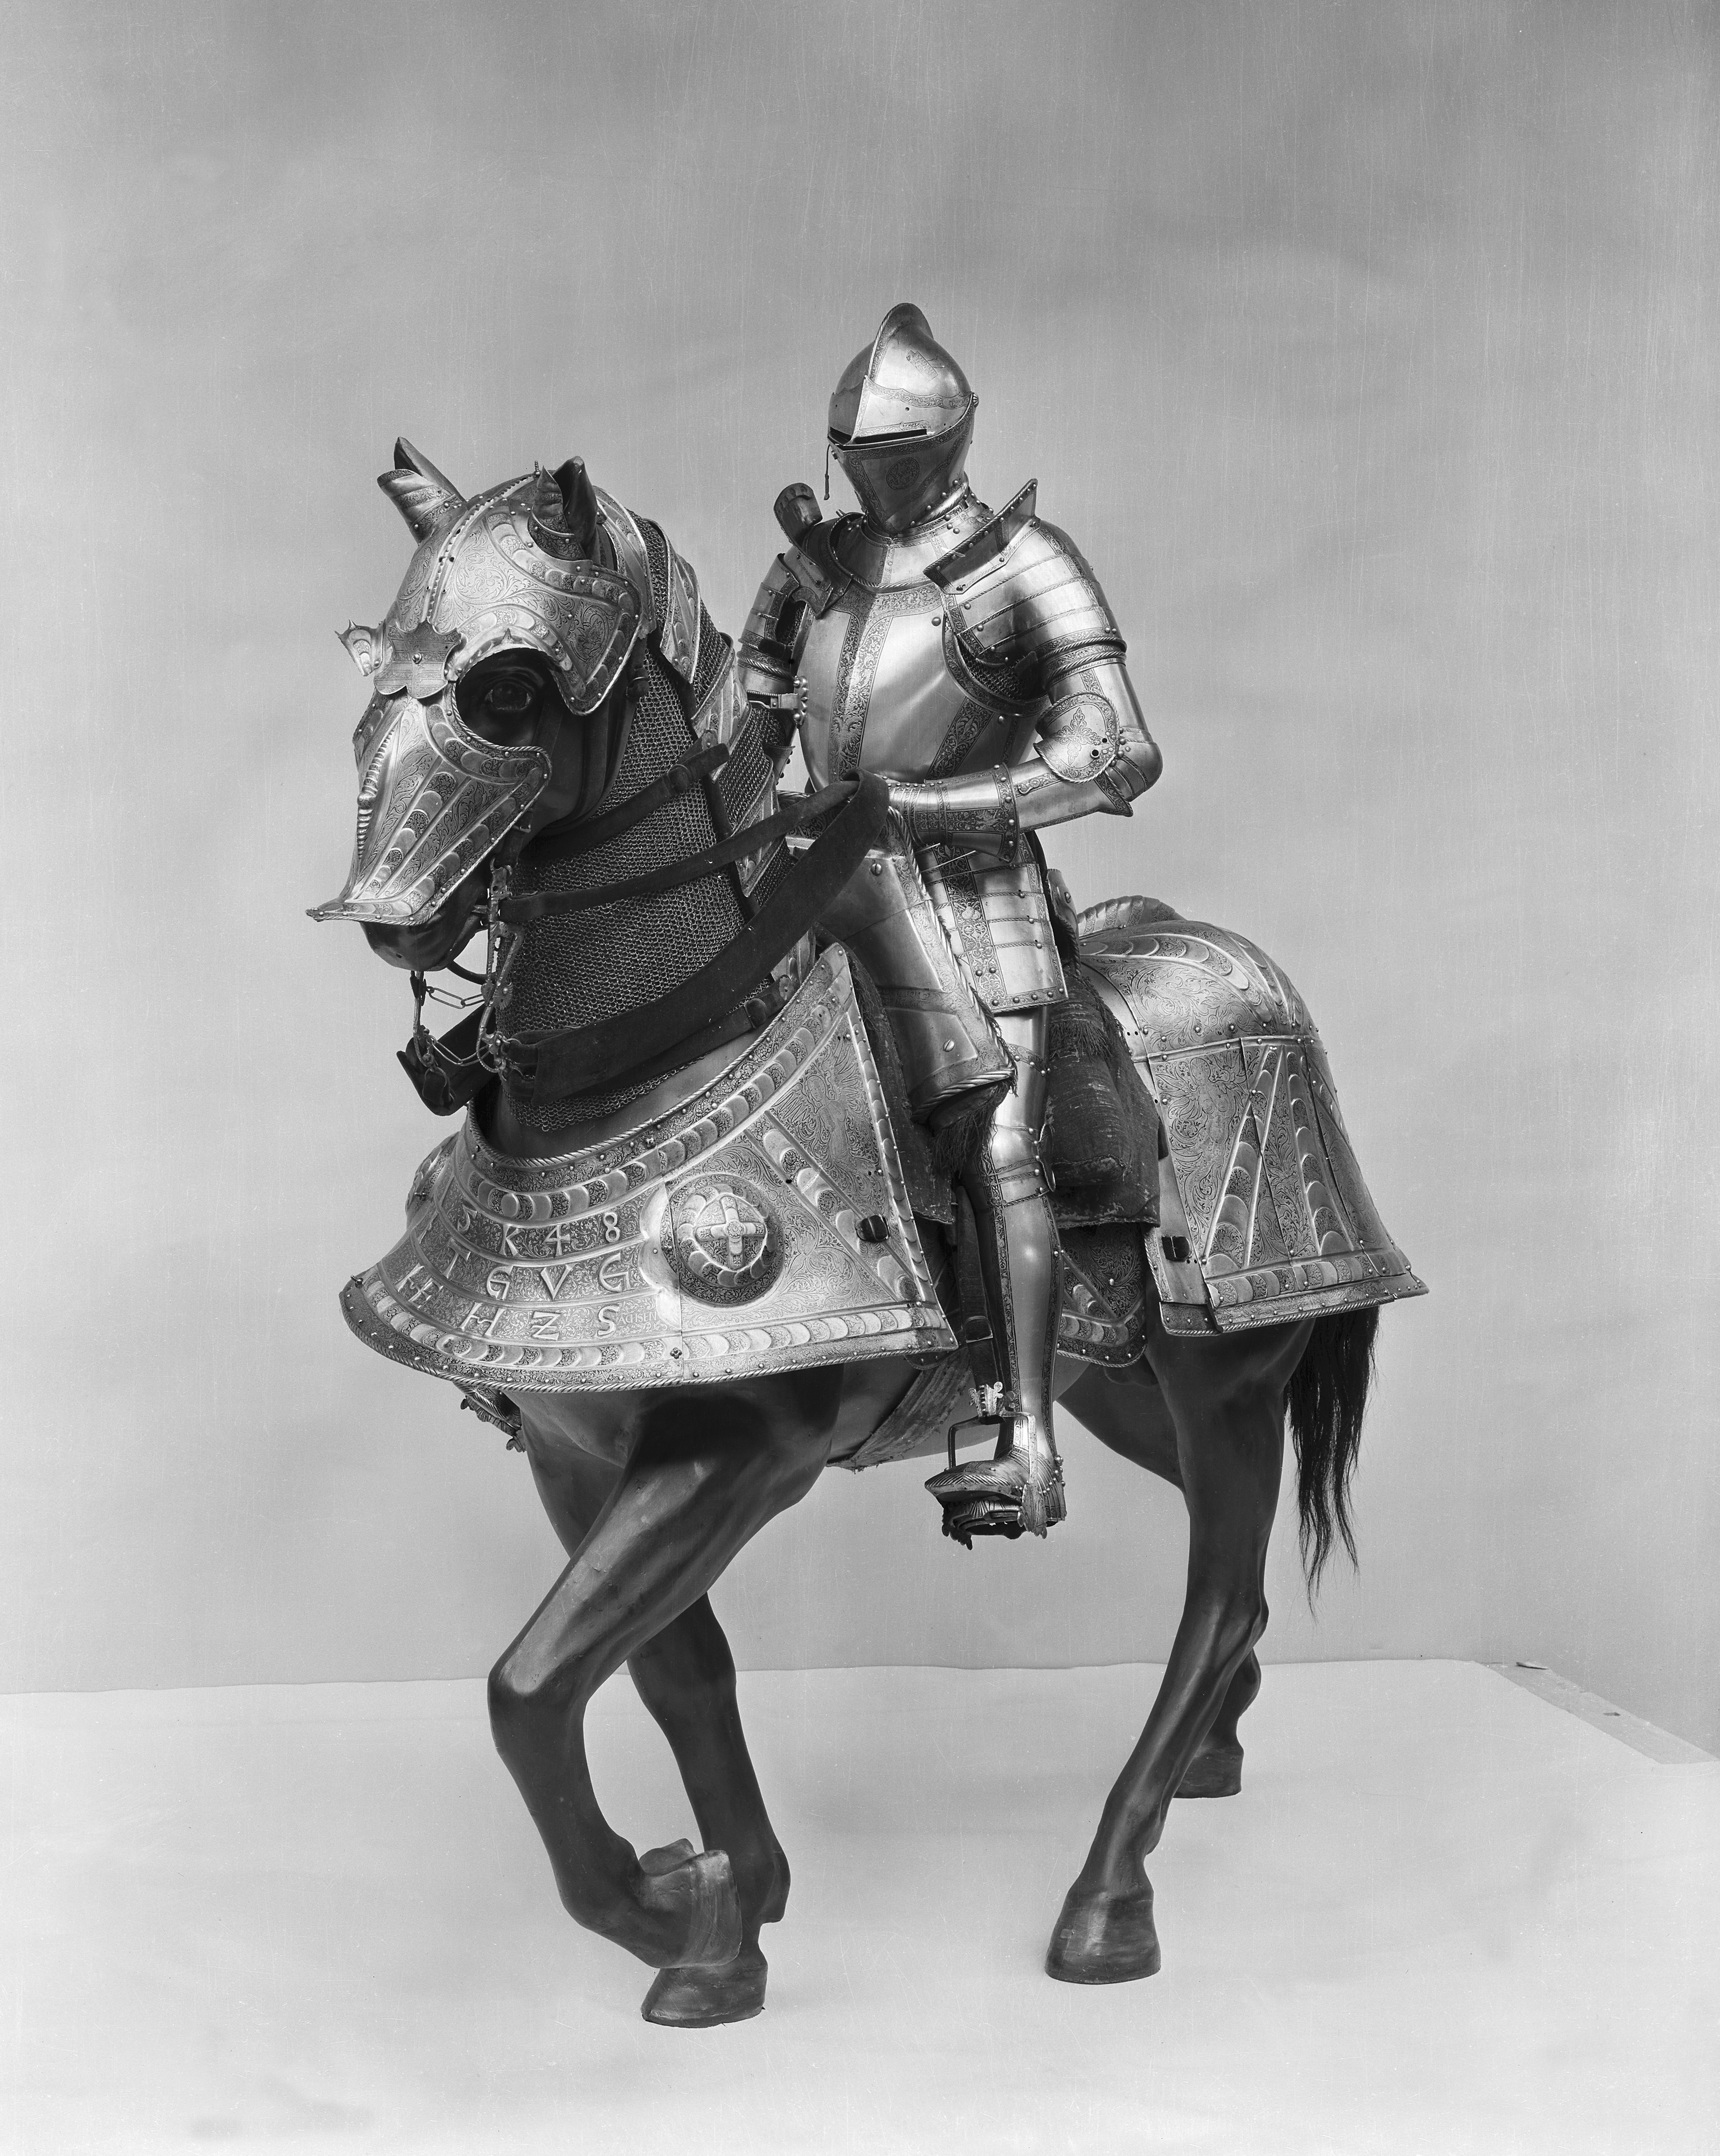 General 3192x4000 armor knight armet gauntlets cuirass greaves armored boots spear horse museum european men portrait display noise